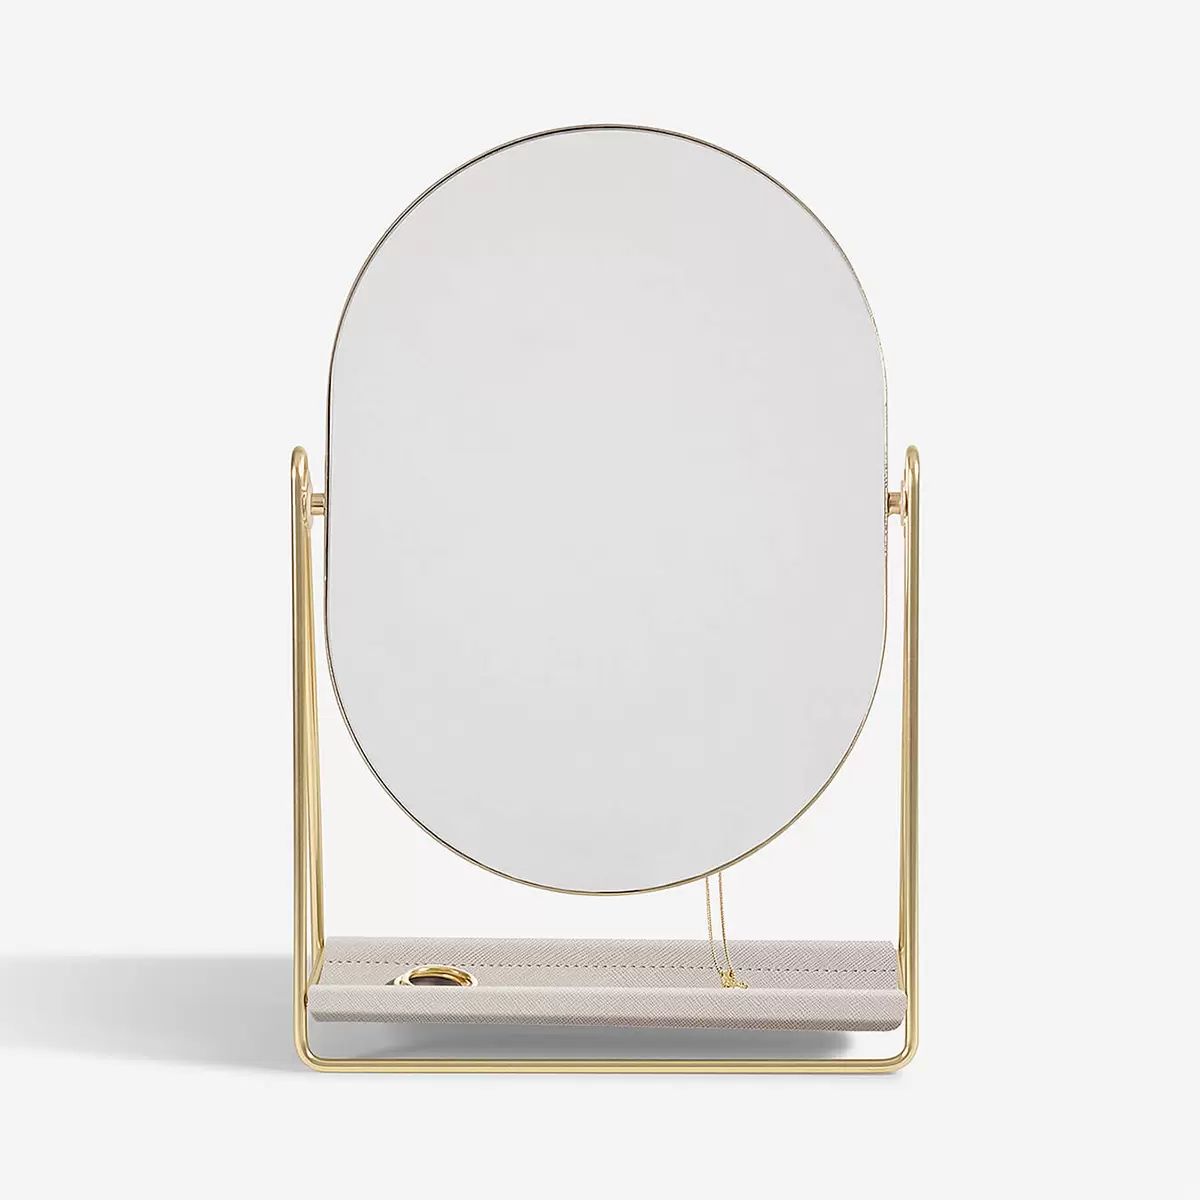 Stackers Mirror & Jewelry Stand | The Container Store